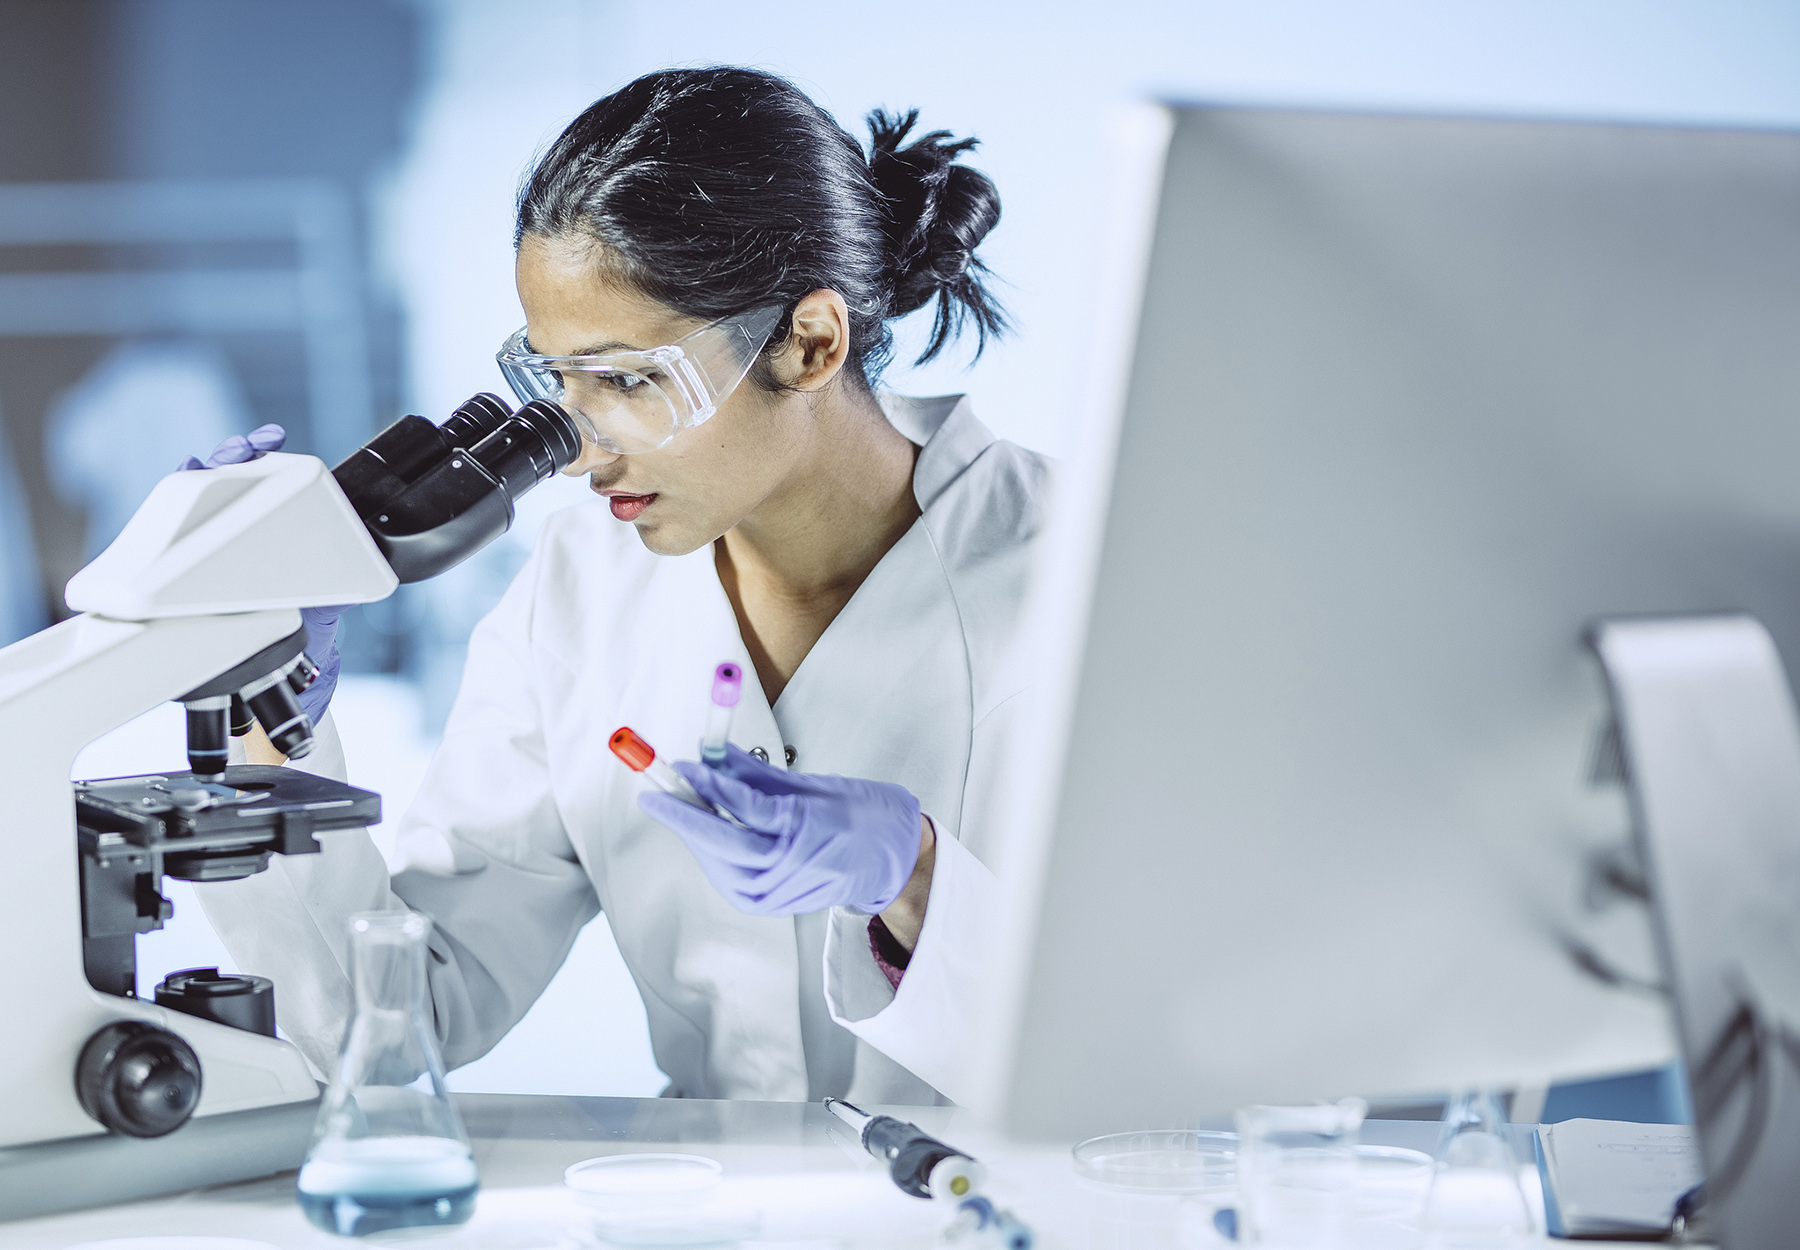 A female scientist working in the laboratory at a microscope while holding test tubes with samples. Stock image.